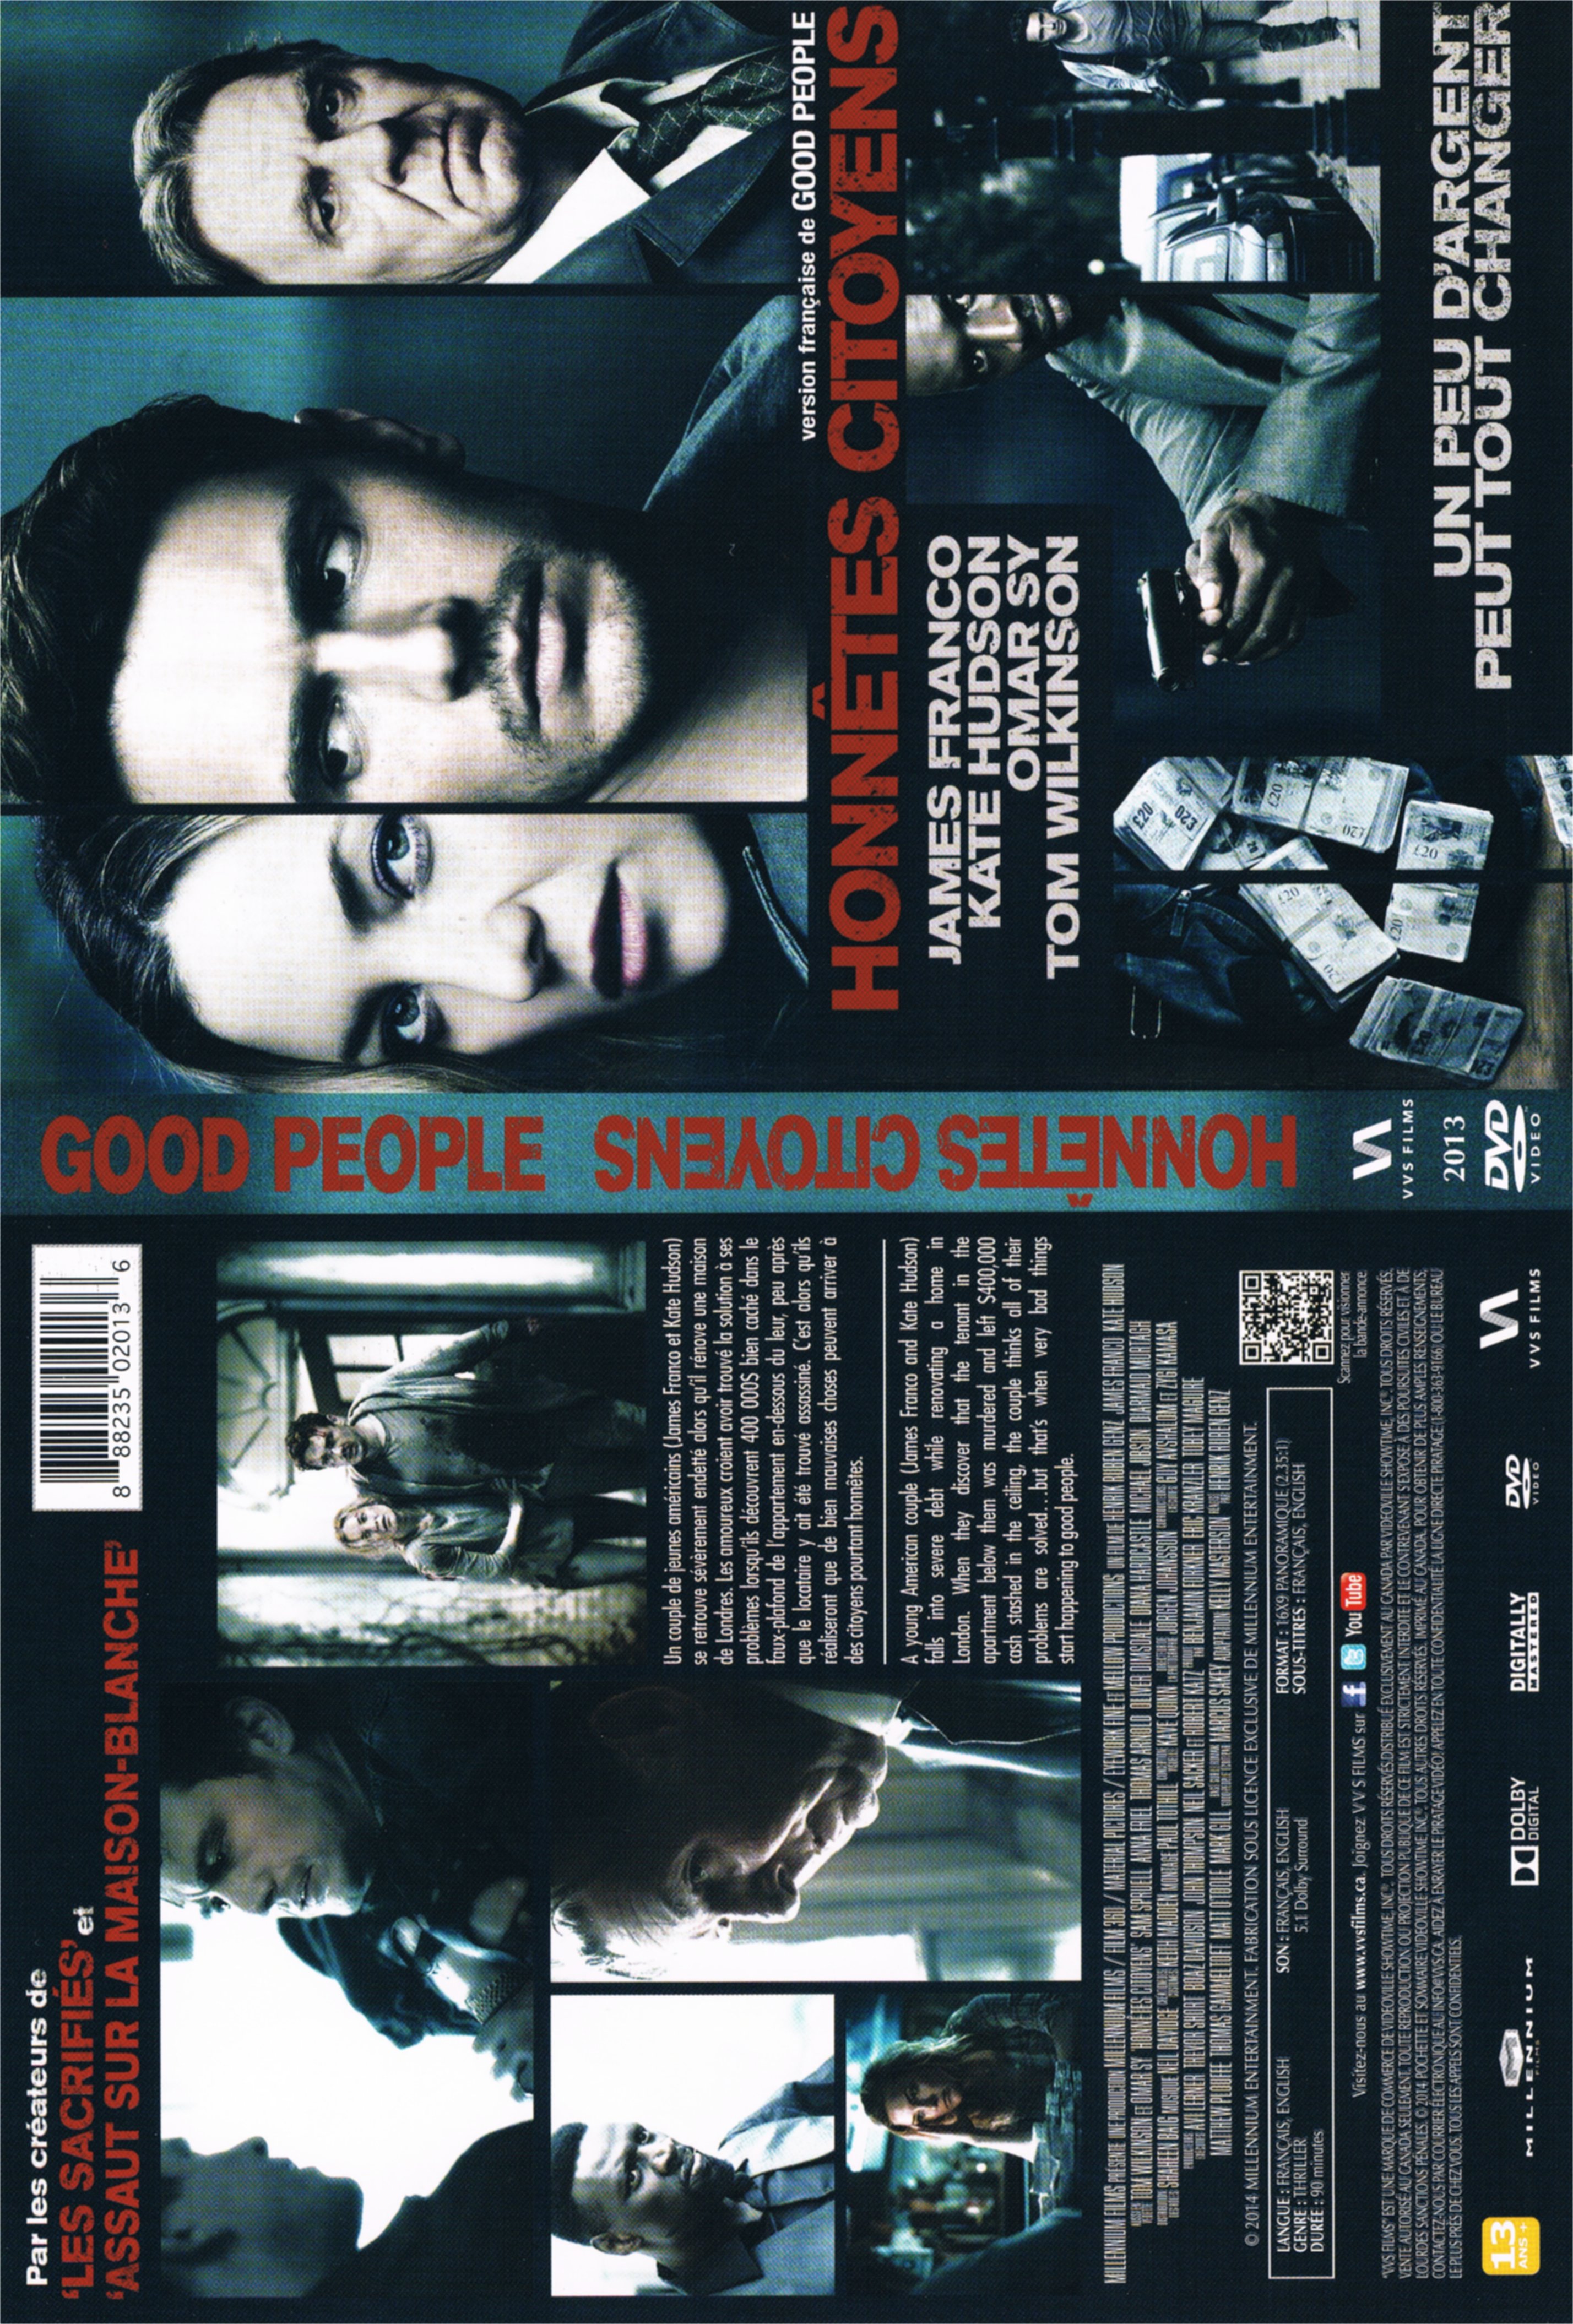 Jaquette DVD Honntes citoyens - Good people (Canadienne)